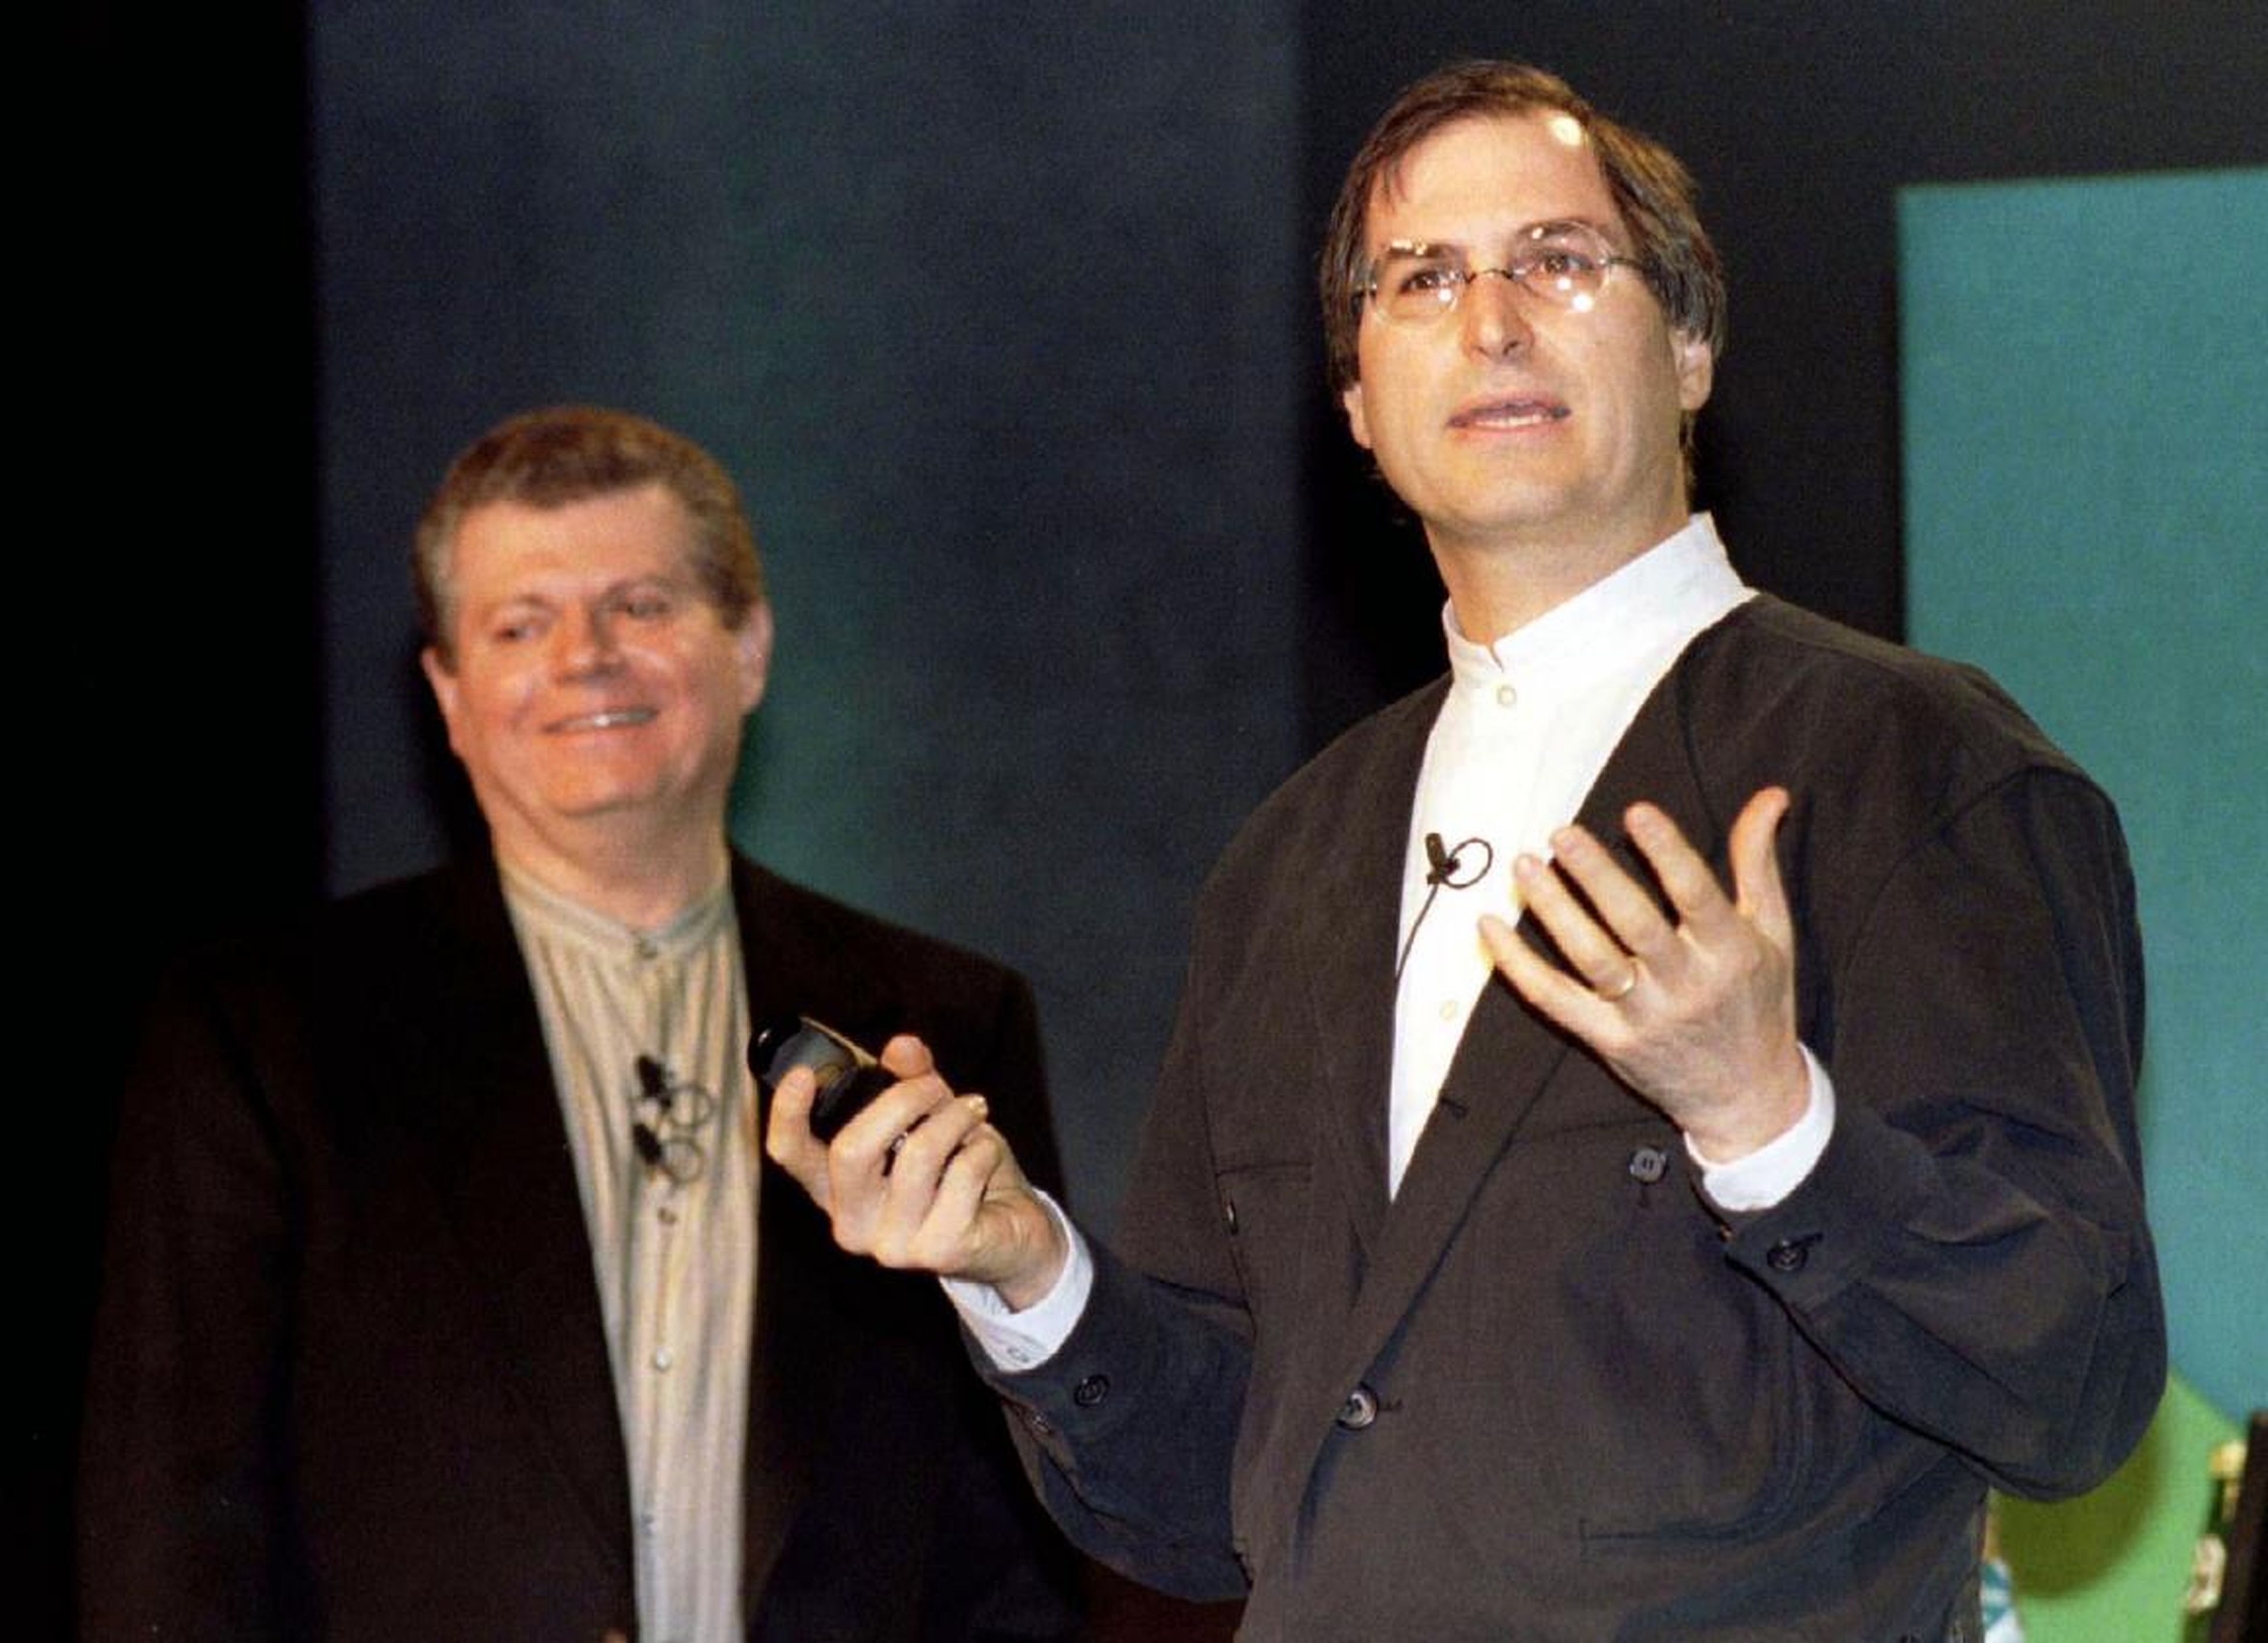 In late 1996, Apple announced plans to bring cofounder Steve Jobs back into the fold 11 years after he left the company by acquiring his startup NeXT for $429 million — just in time for Jobs to join then-Apple CEO Gil Amelio on